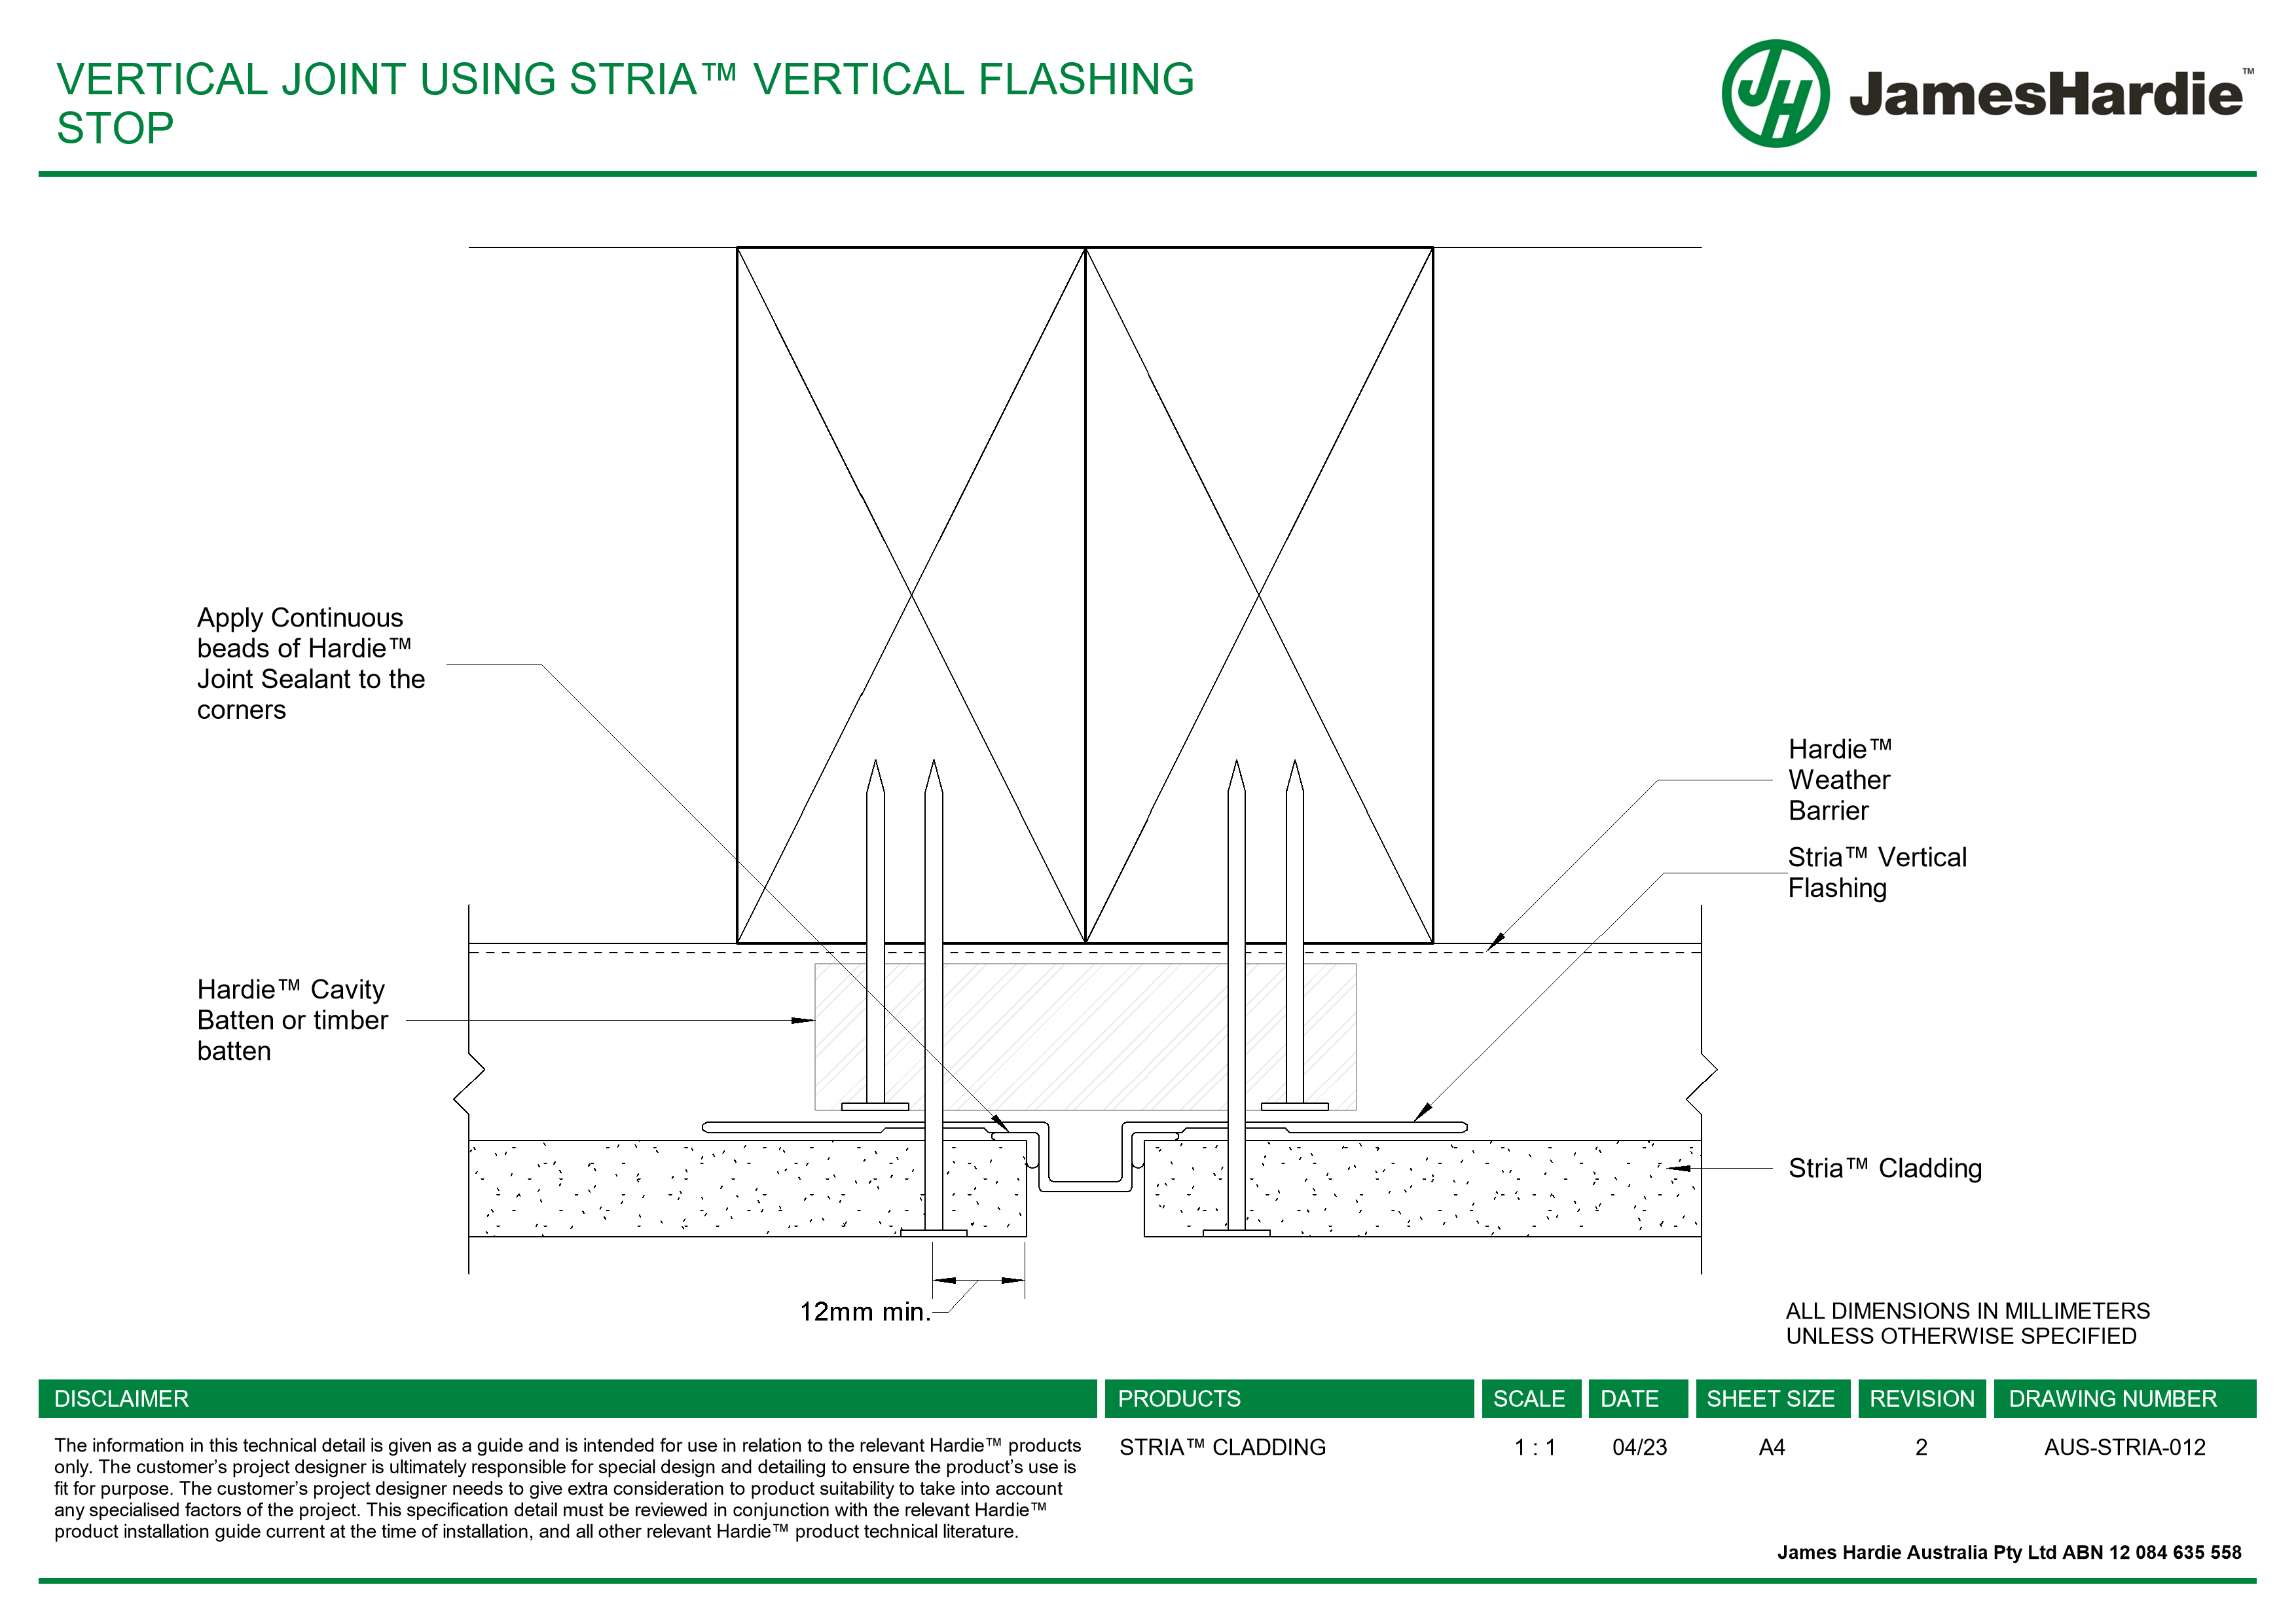  Image of AUS-STRIA-012 - VERTICAL JOINT USING STRIA™ VERTICAL FLASHING STOP